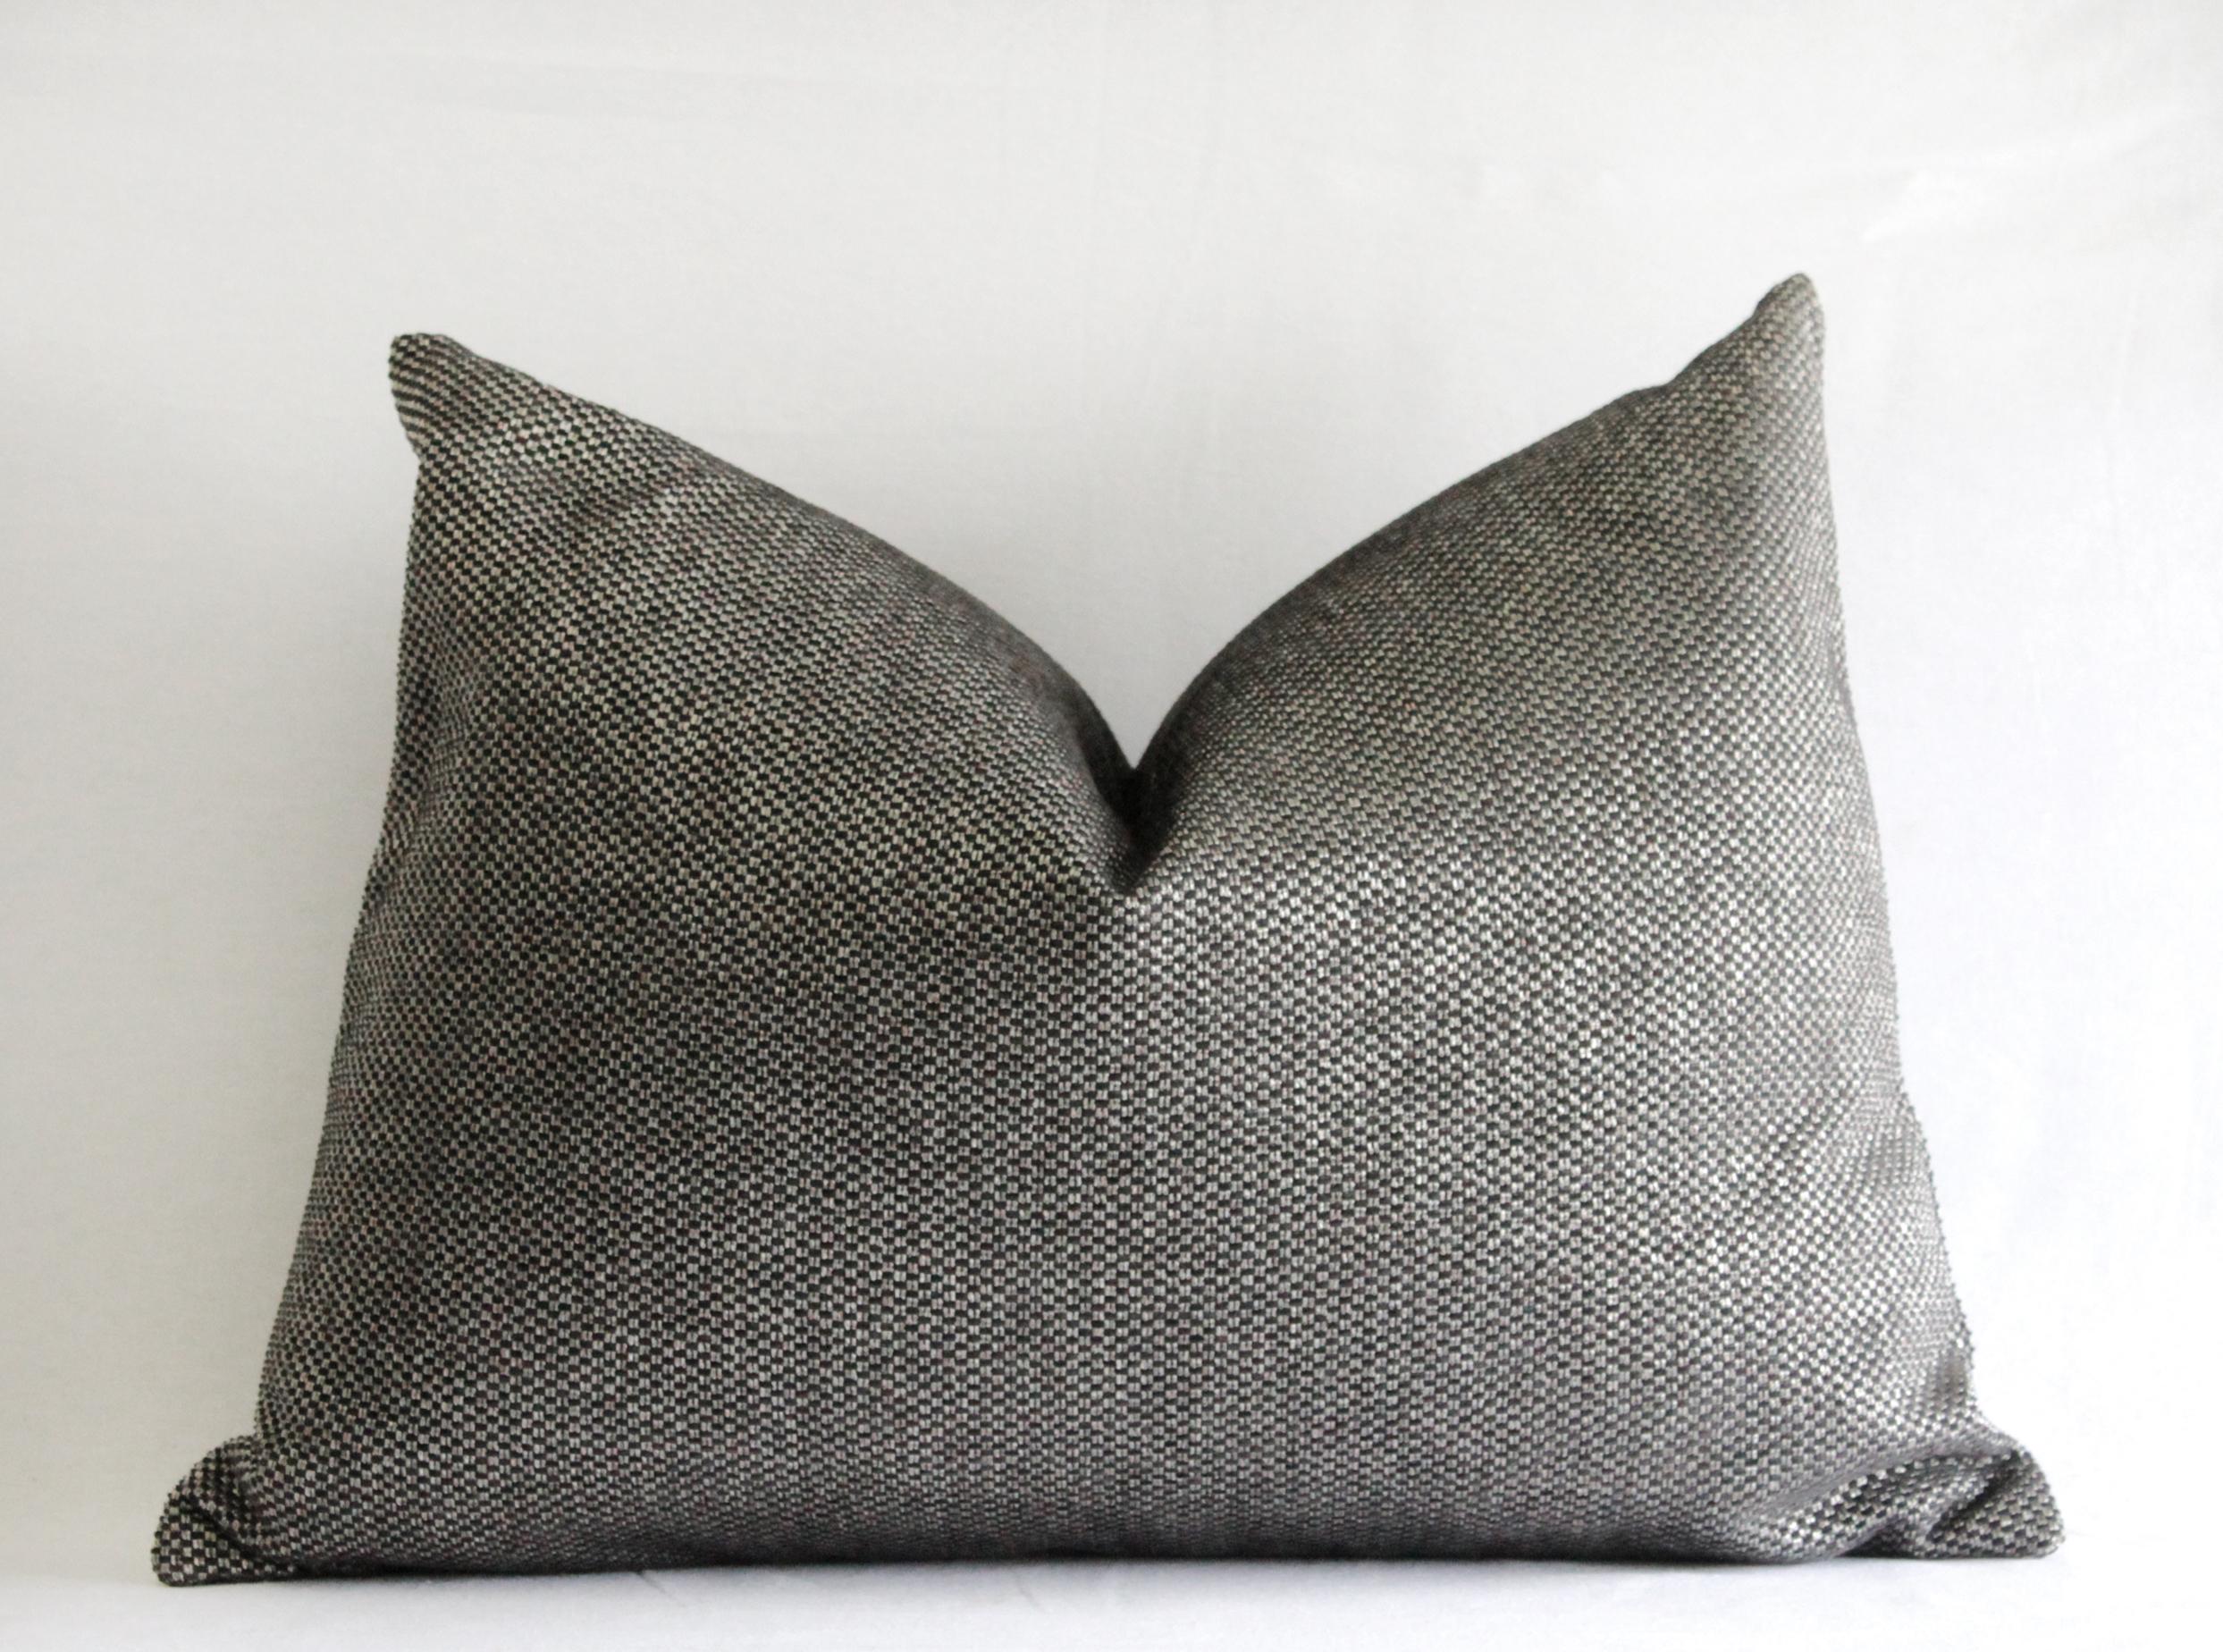 Price is for each pillow. Includes down/feather insert
Custom made from a beautiful woven fabric, has a sleek modern feel.
Made with a knife edge, and overlocked with a zipper closure.
Measures: 17